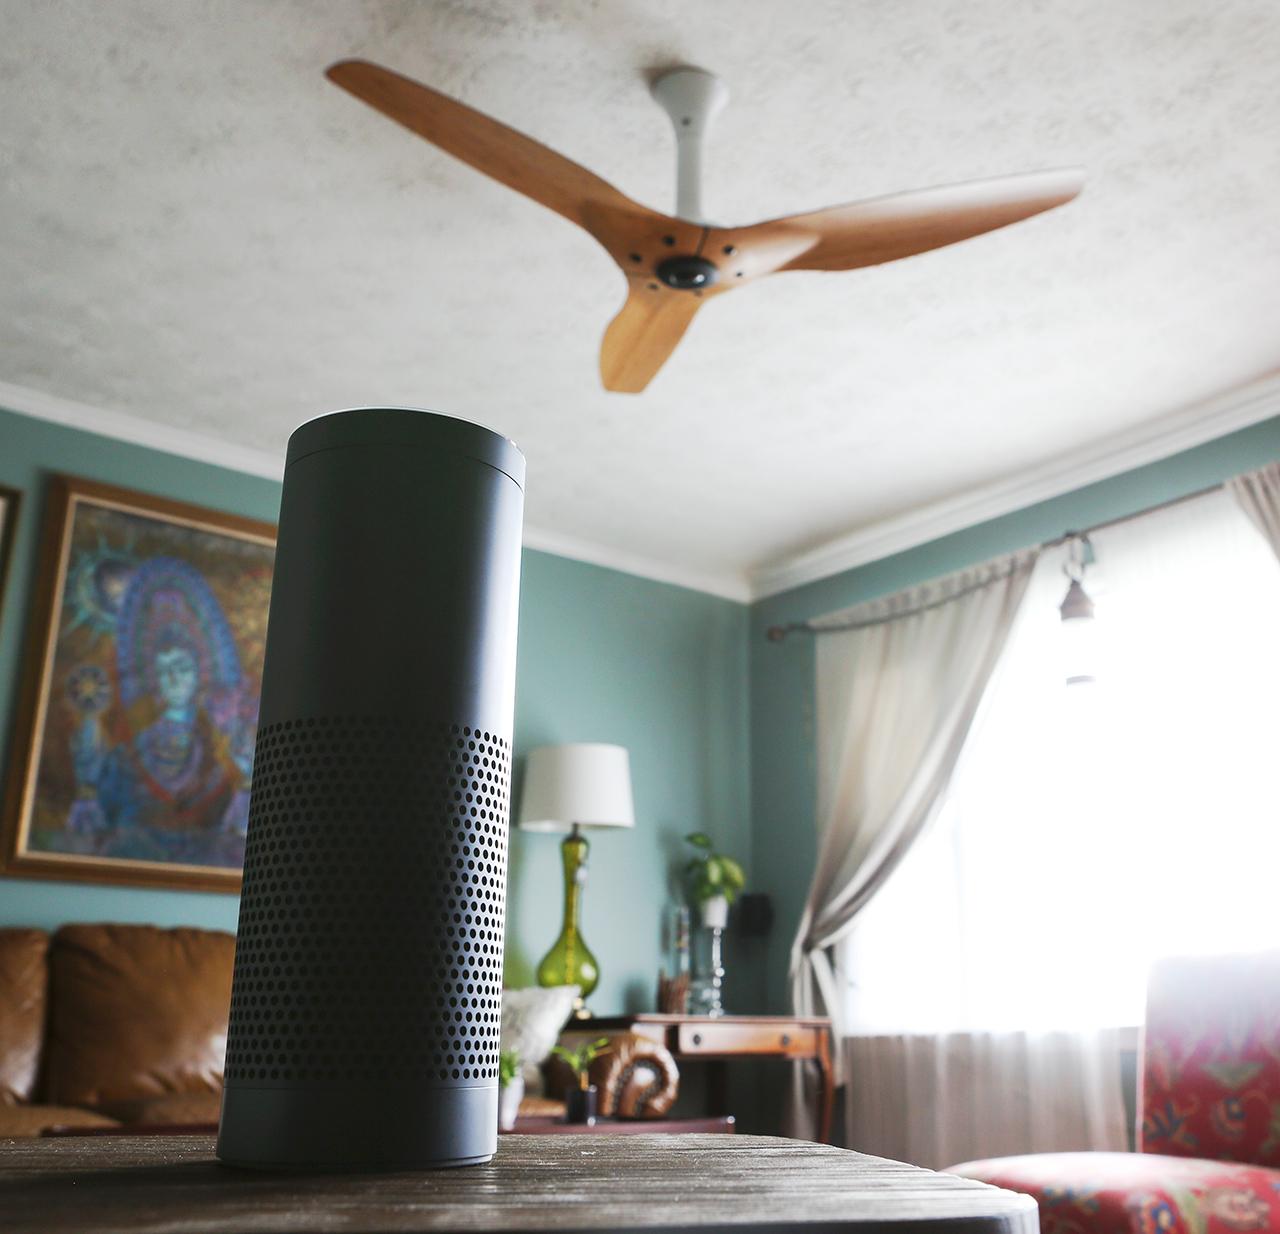 How To Control A Ceiling Fan With Alexa